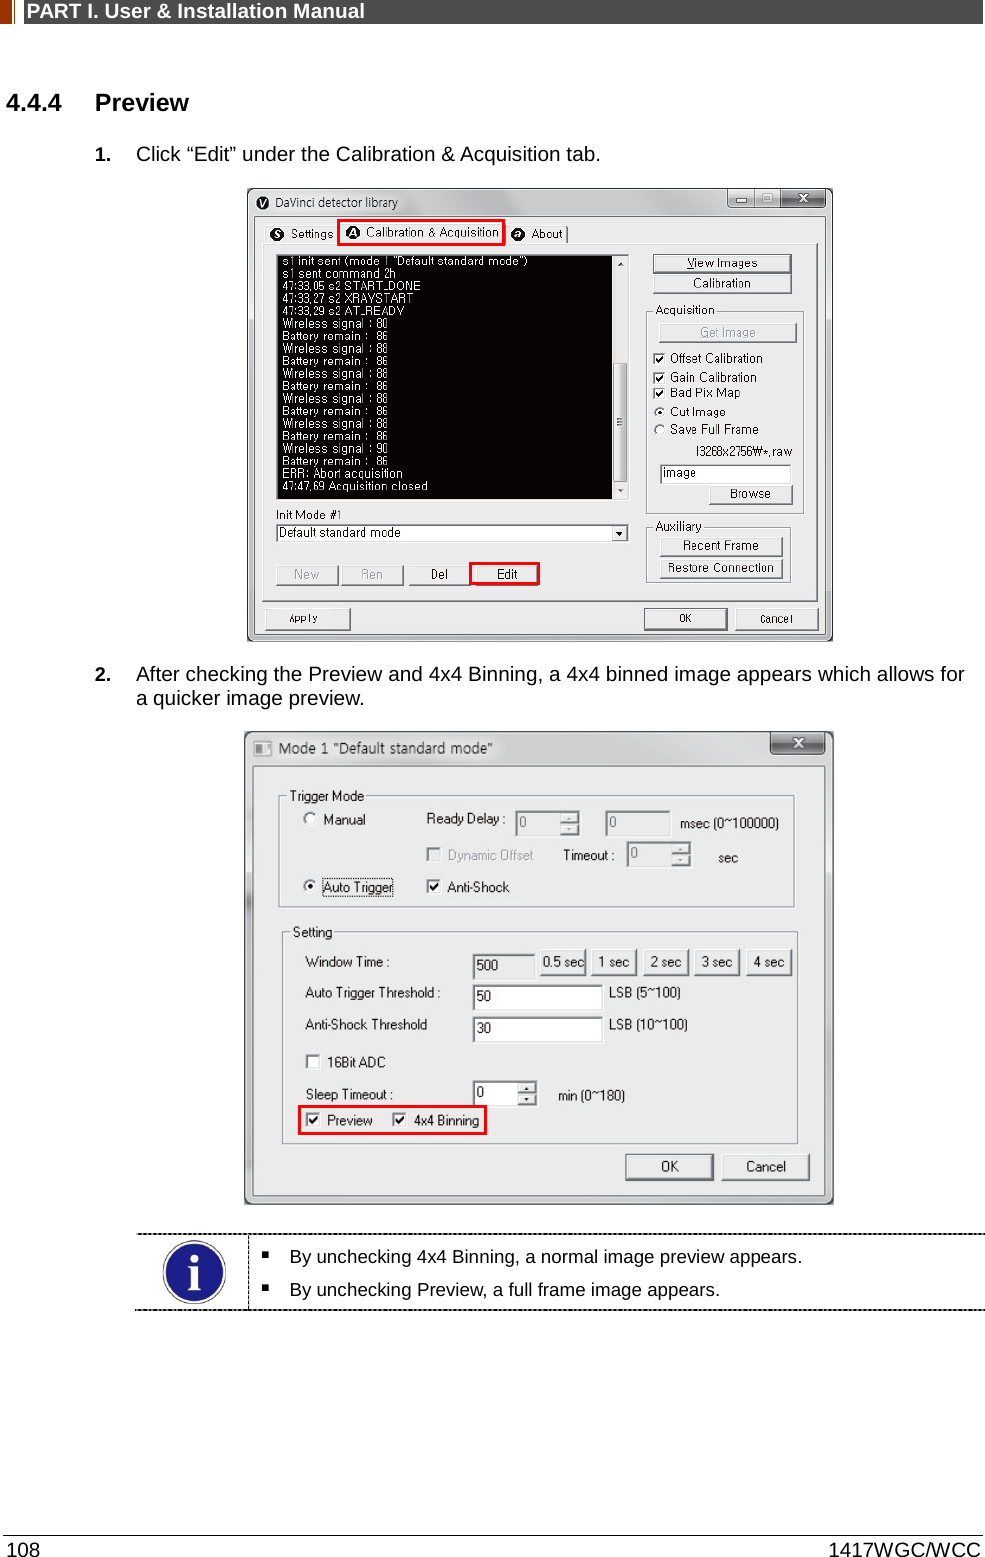 PART I. User &amp; Installation Manual 108 1417WGC/WCC 4.4.4 Preview 1. Click “Edit” under the Calibration &amp; Acquisition tab.  2. After checking the Preview and 4x4 Binning, a 4x4 binned image appears which allows for a quicker image preview.     By unchecking 4x4 Binning, a normal image preview appears.  By unchecking Preview, a full frame image appears.   